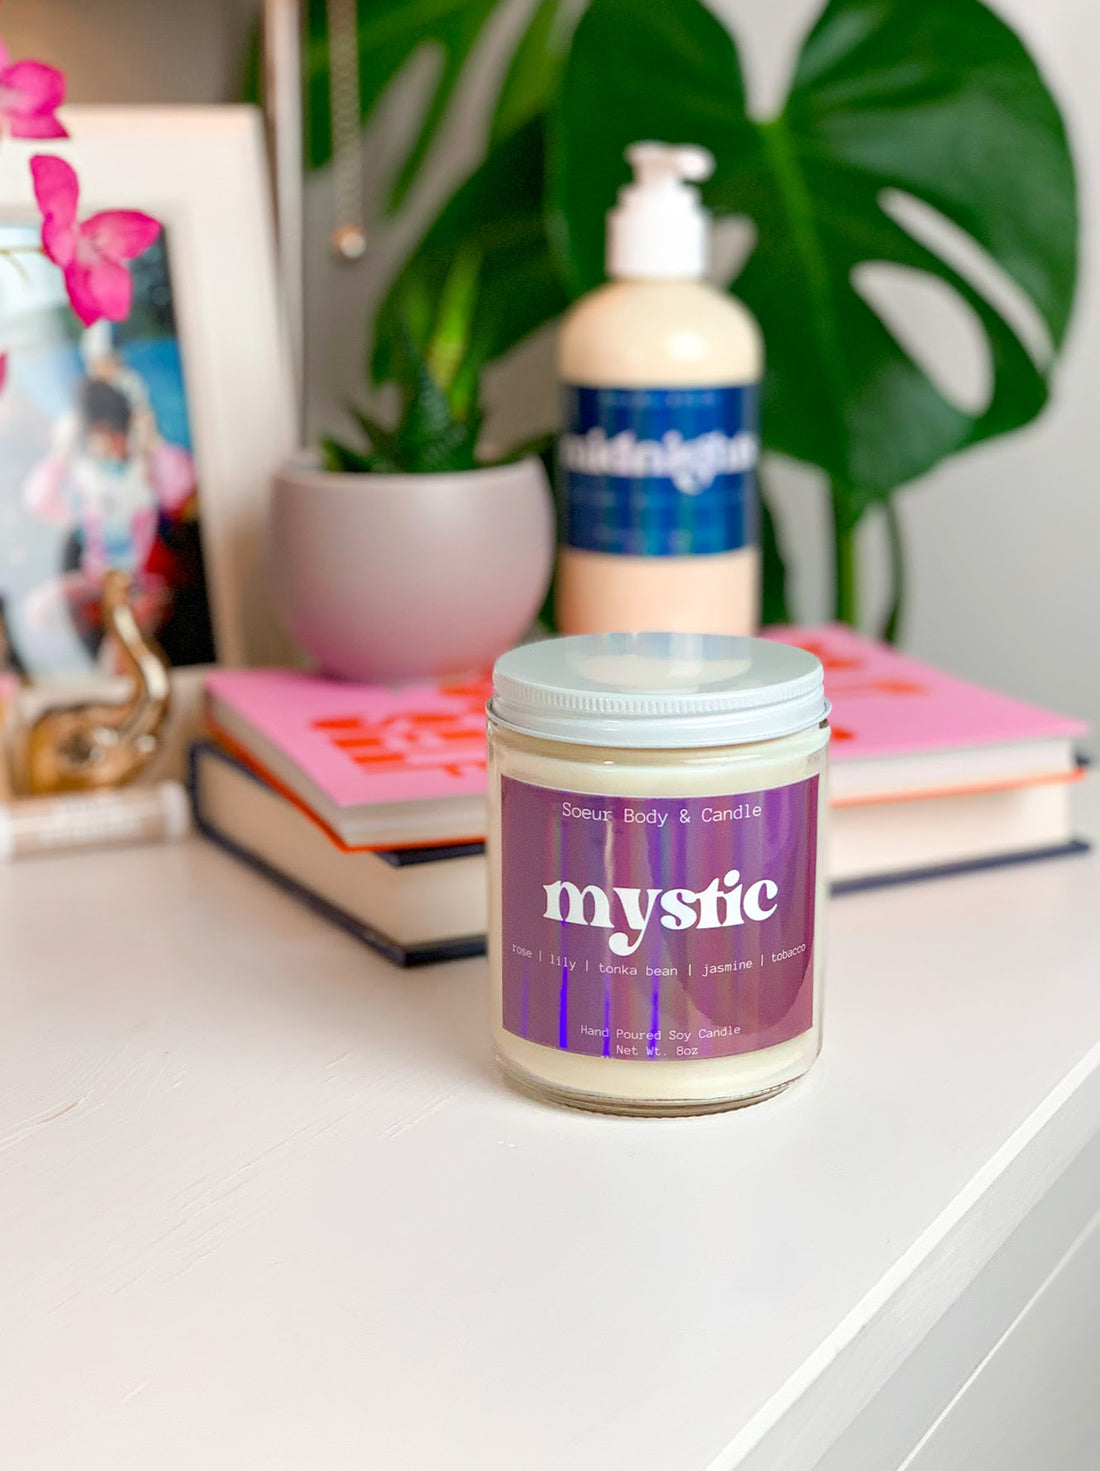 Mystic Soy Candle (rose, lily, tonka bean, jasmine, tobacco)